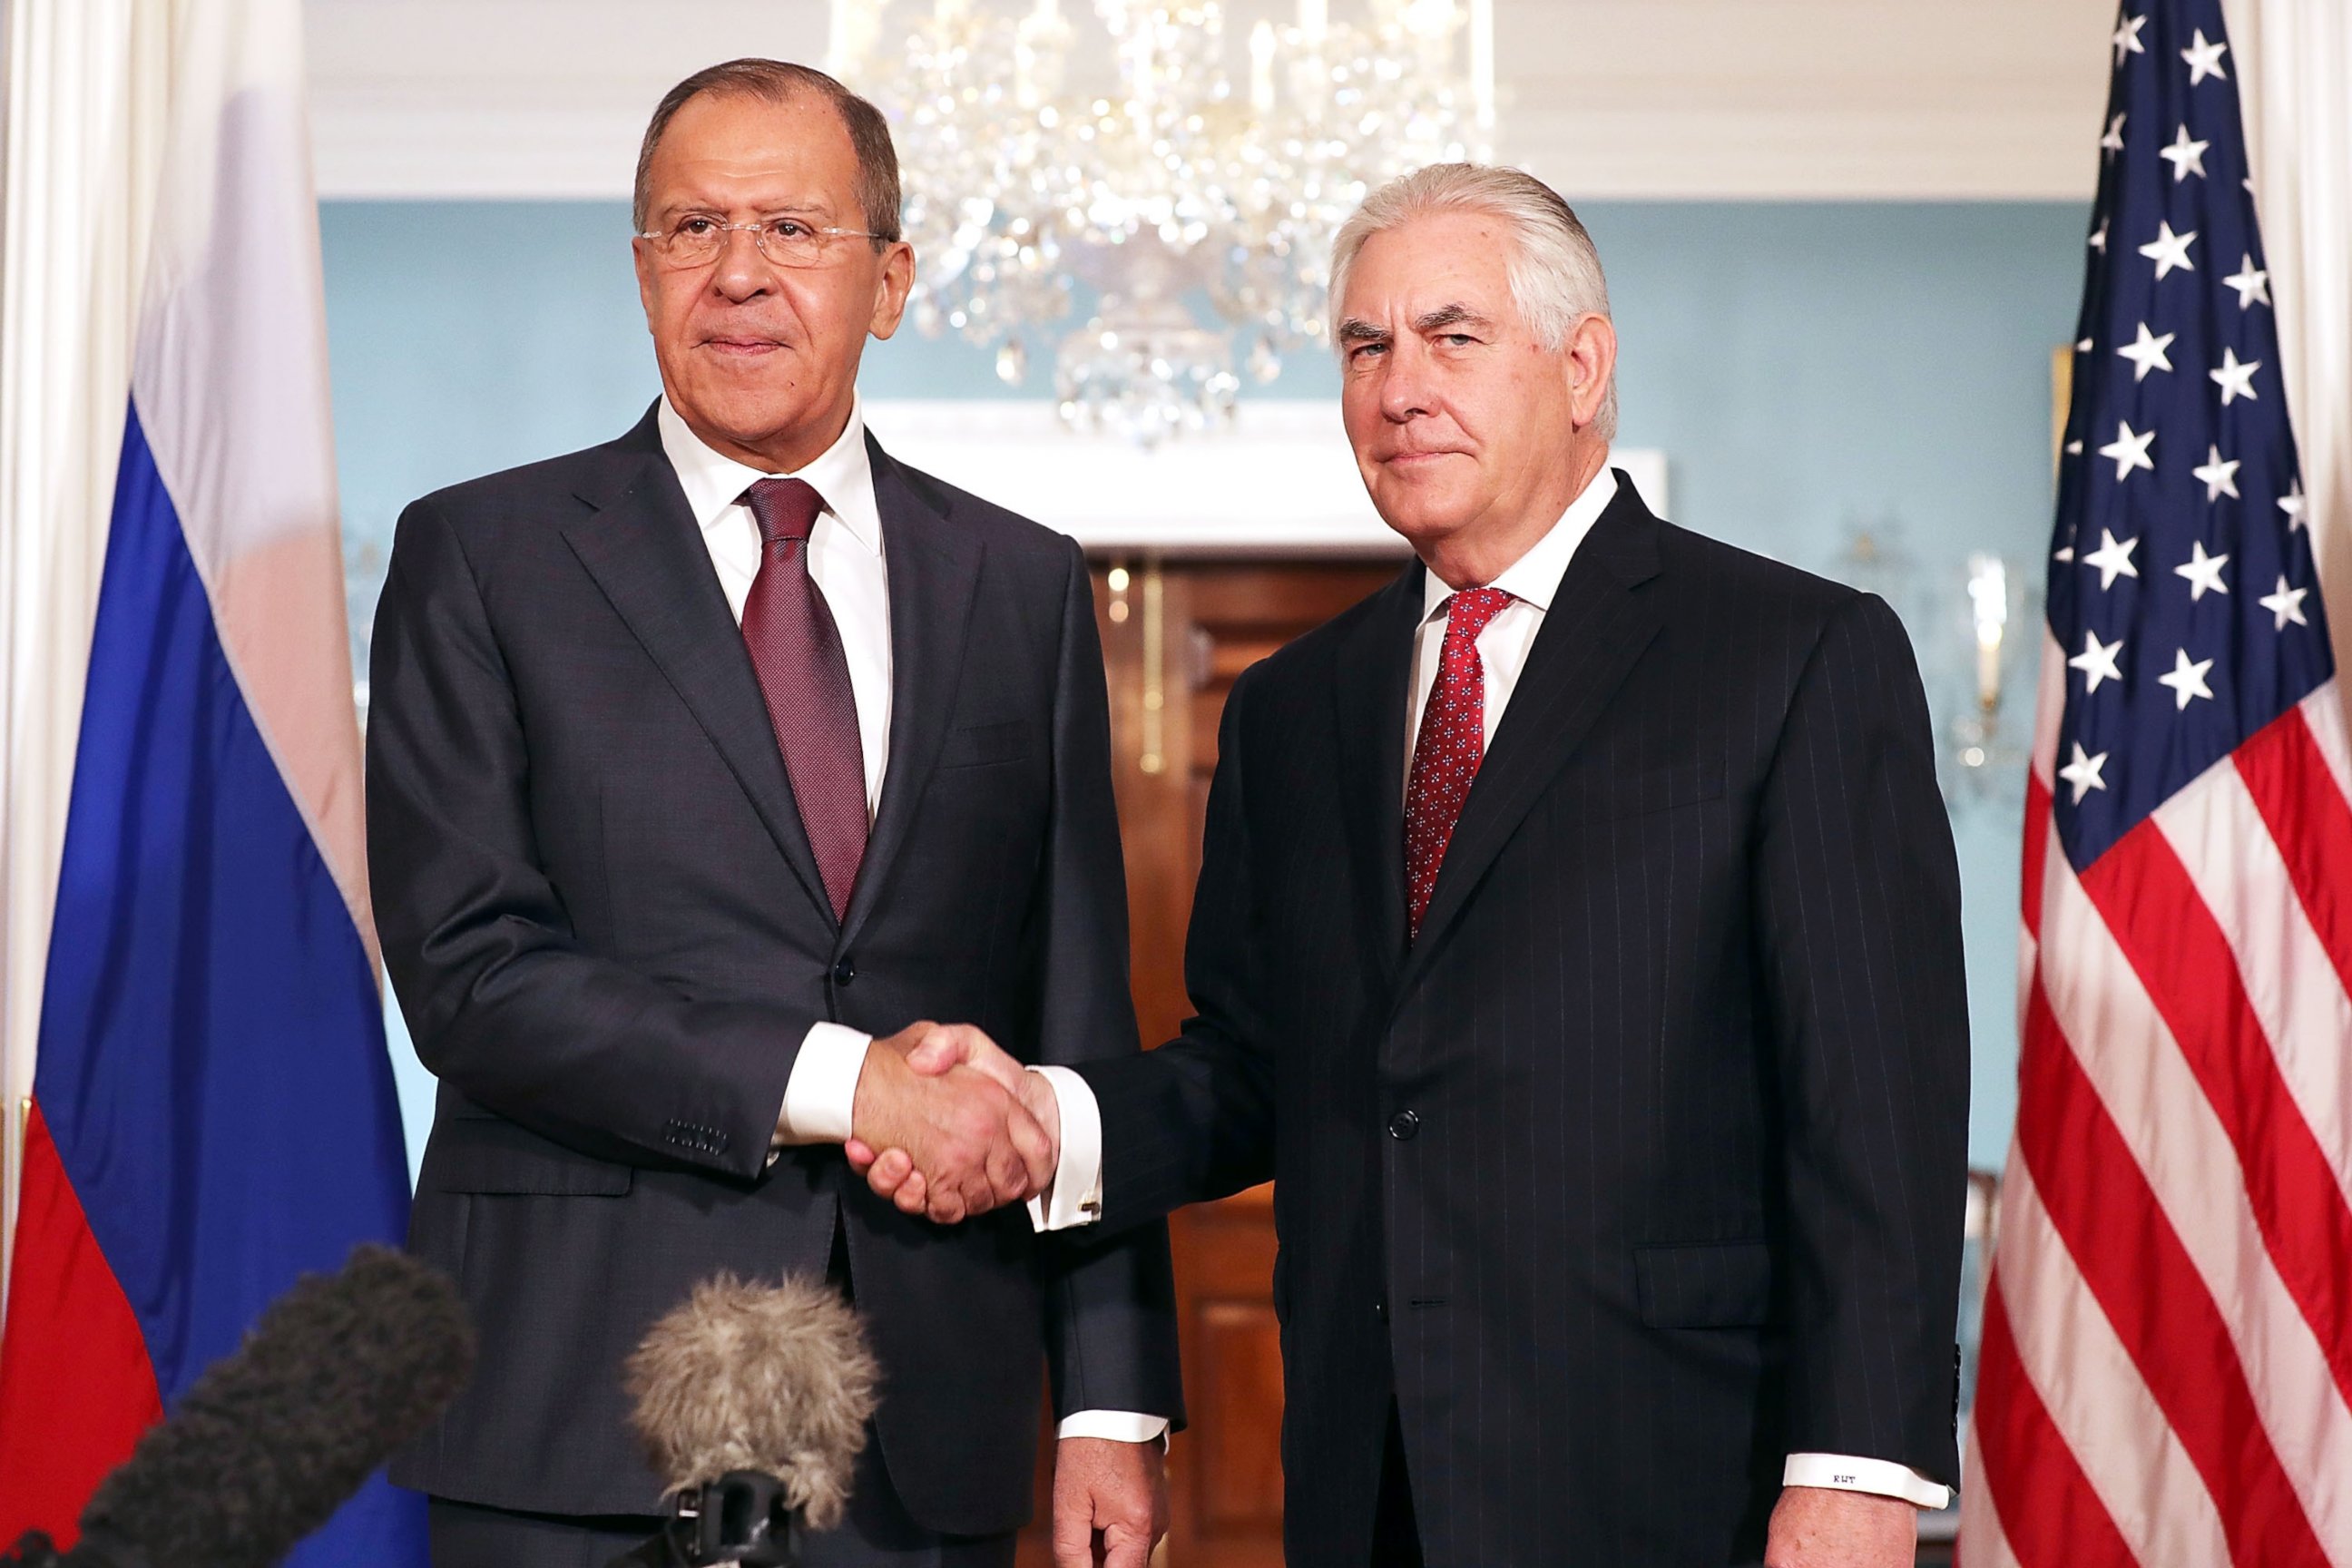 PHOTO: Russian Foreign Minister Sergey Lavrov (L) and U.S. Secretary of State Rex Tillerson shake hands in the Treaty Room before heading into meetings at the State Department, May 10, 2017, in Washington.